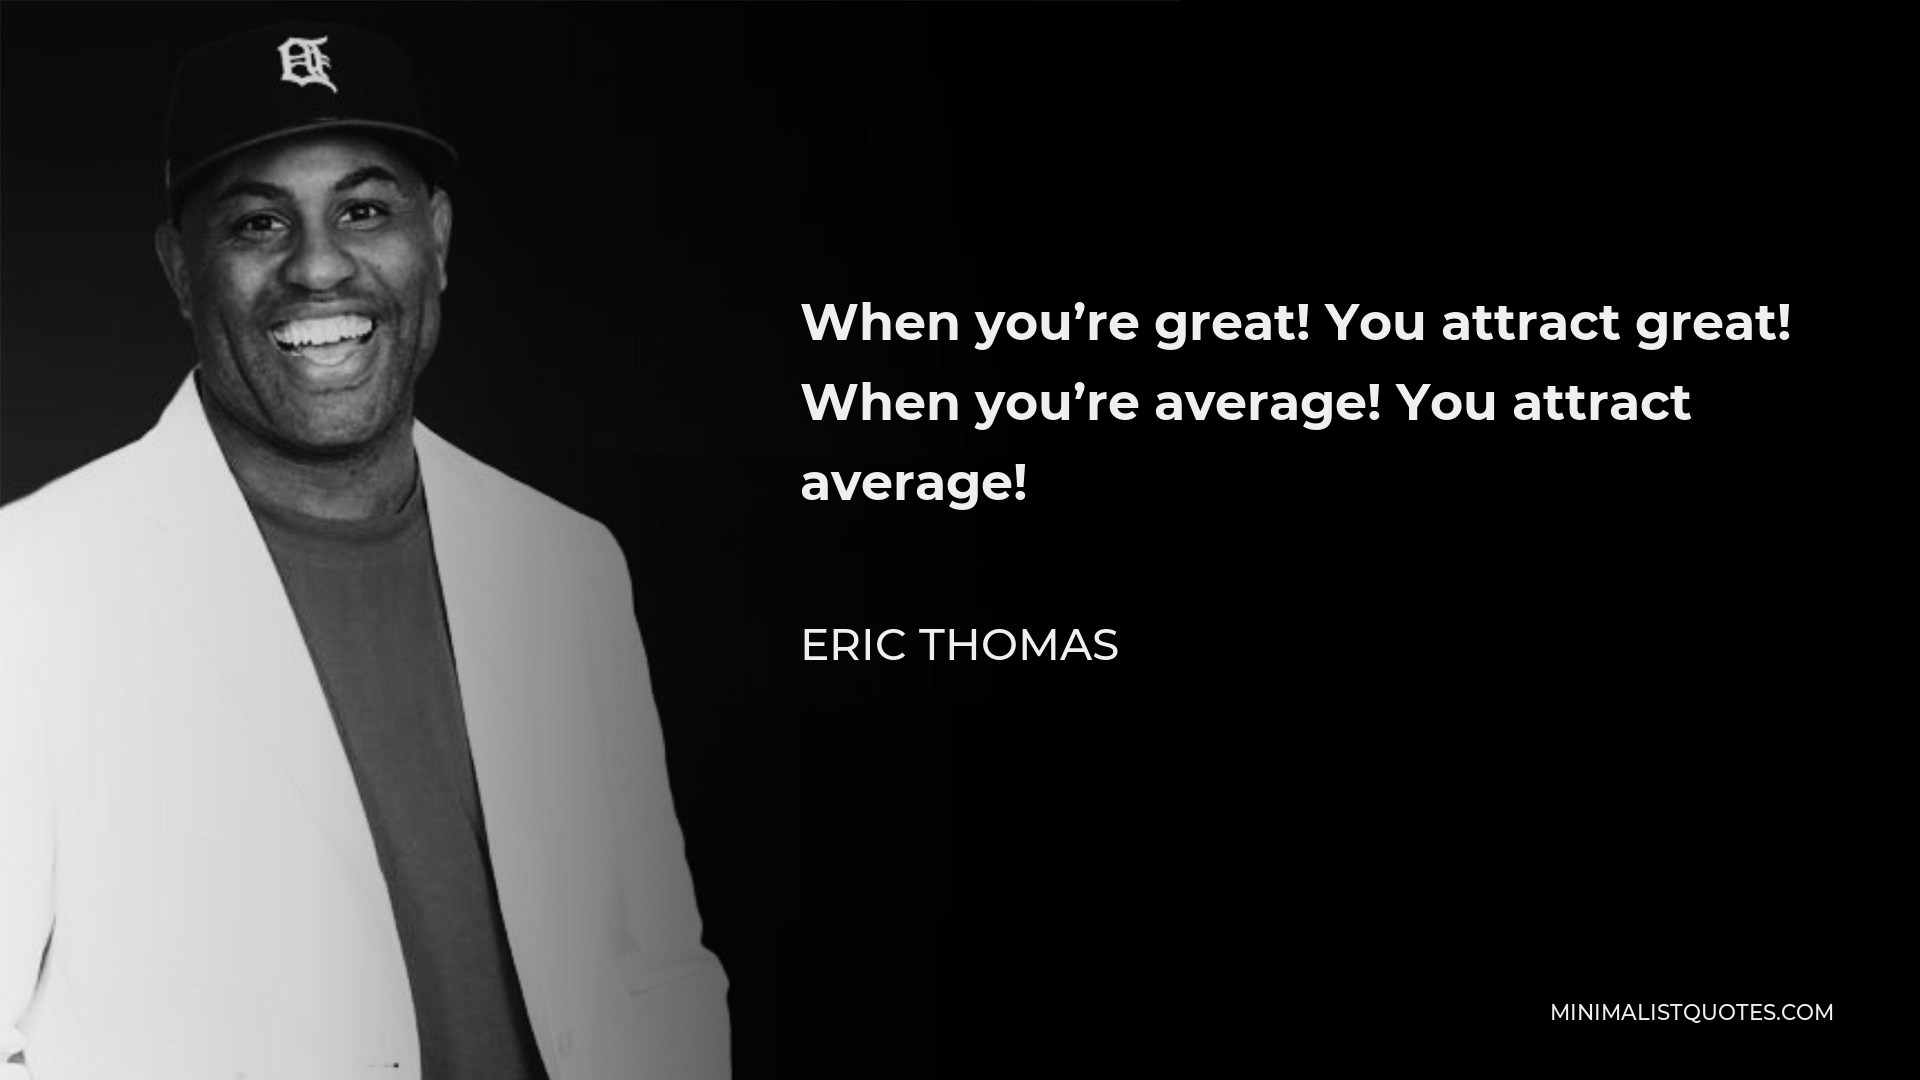 Eric Thomas Quote - When you’re great! You attract great! When you’re average! You attract average!